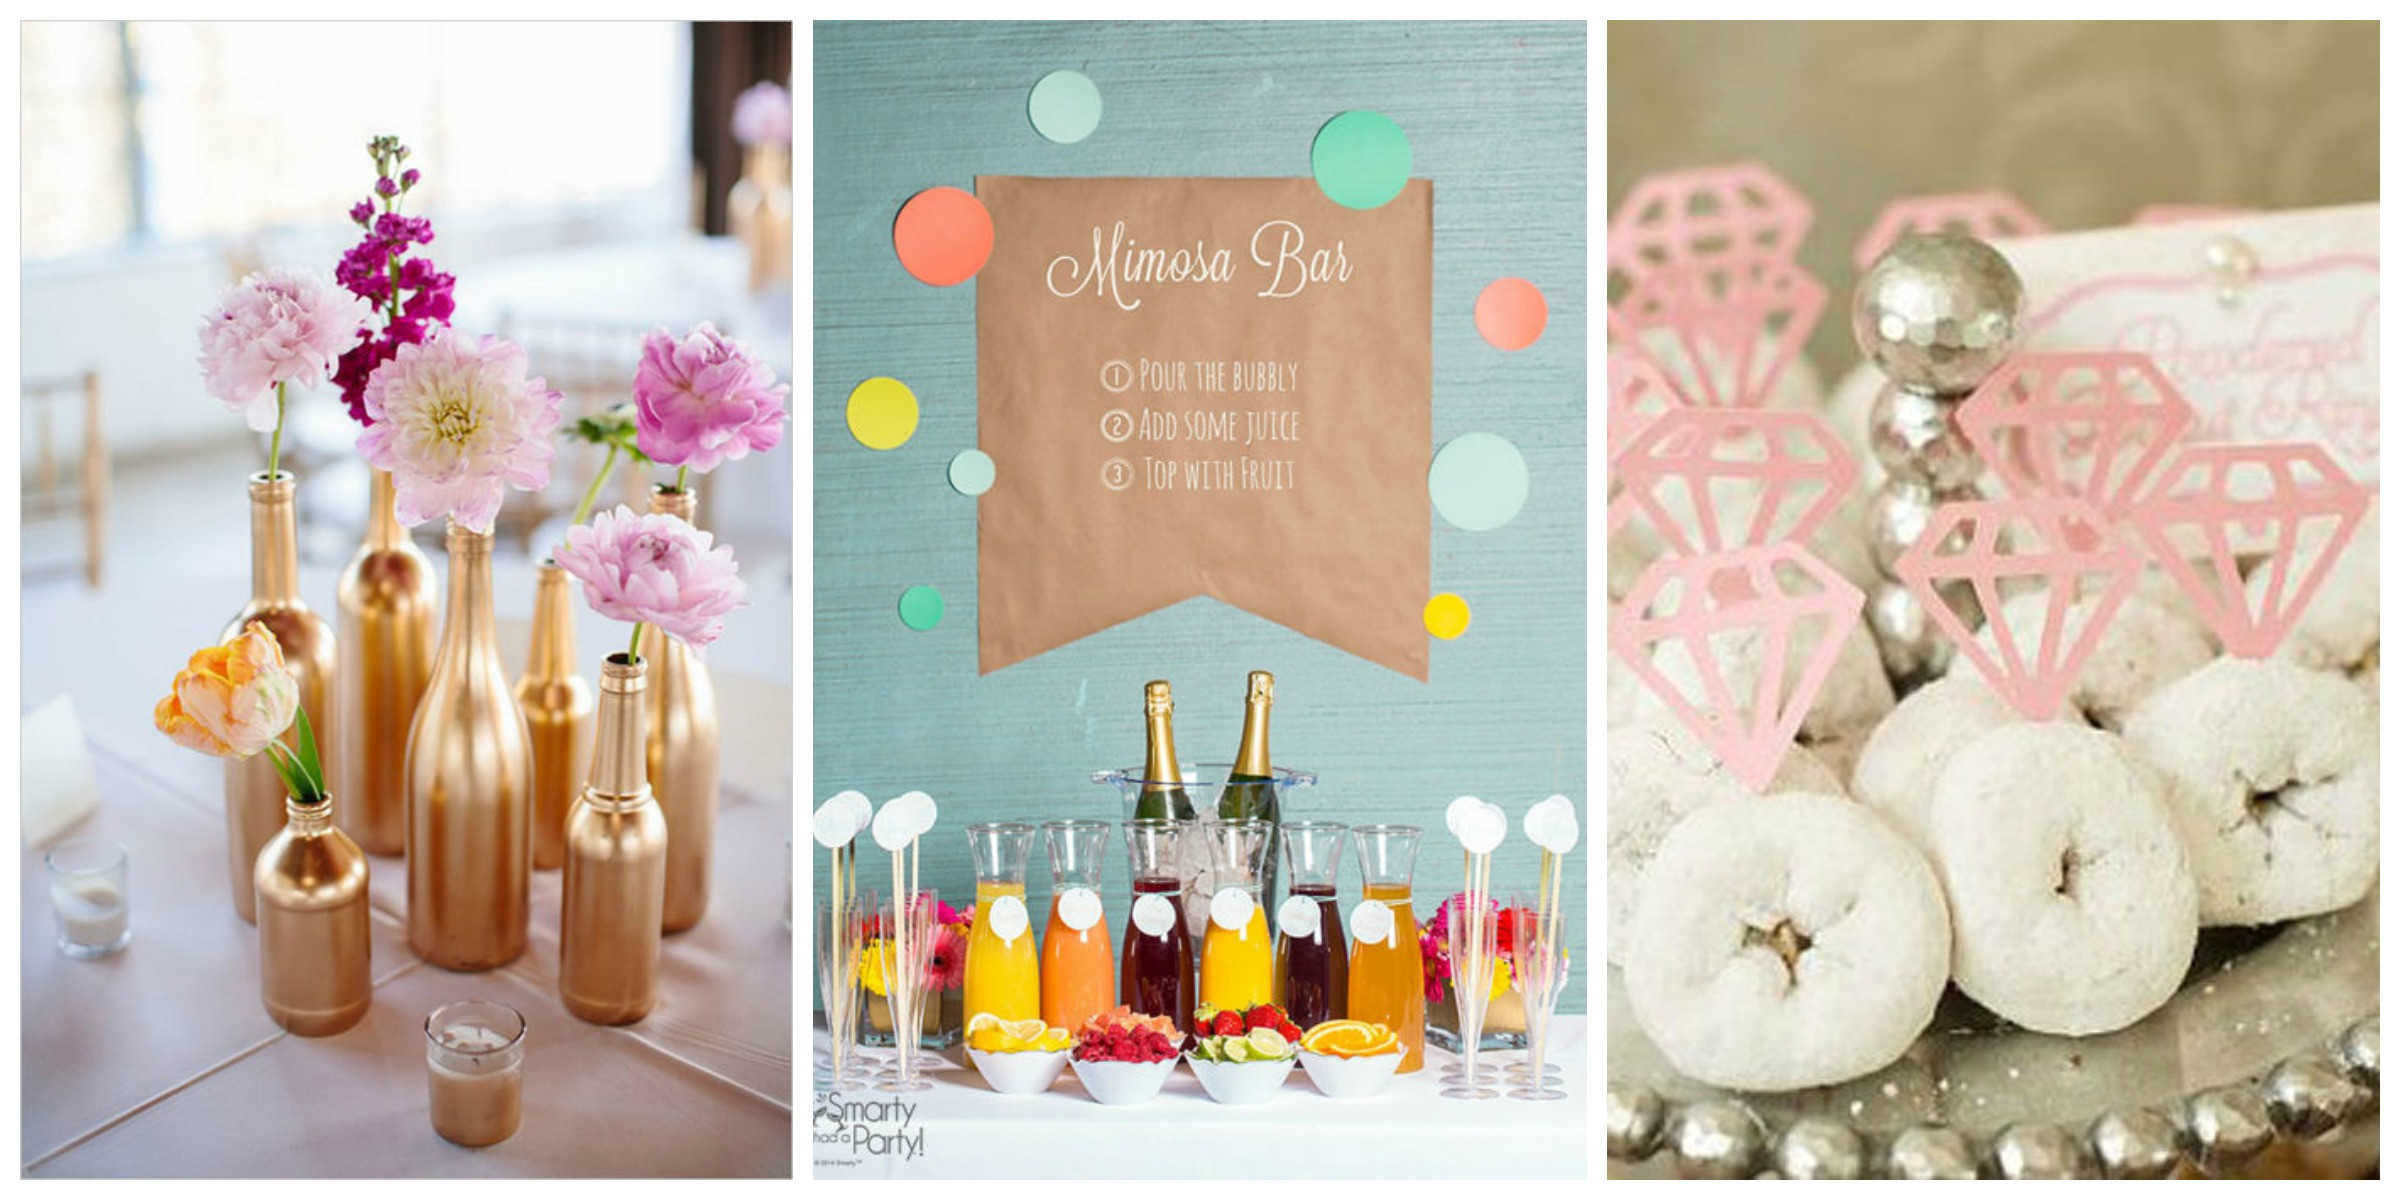 Themes For Wedding Showers
 40 Best Bridal Shower Ideas Fun Themes Food and